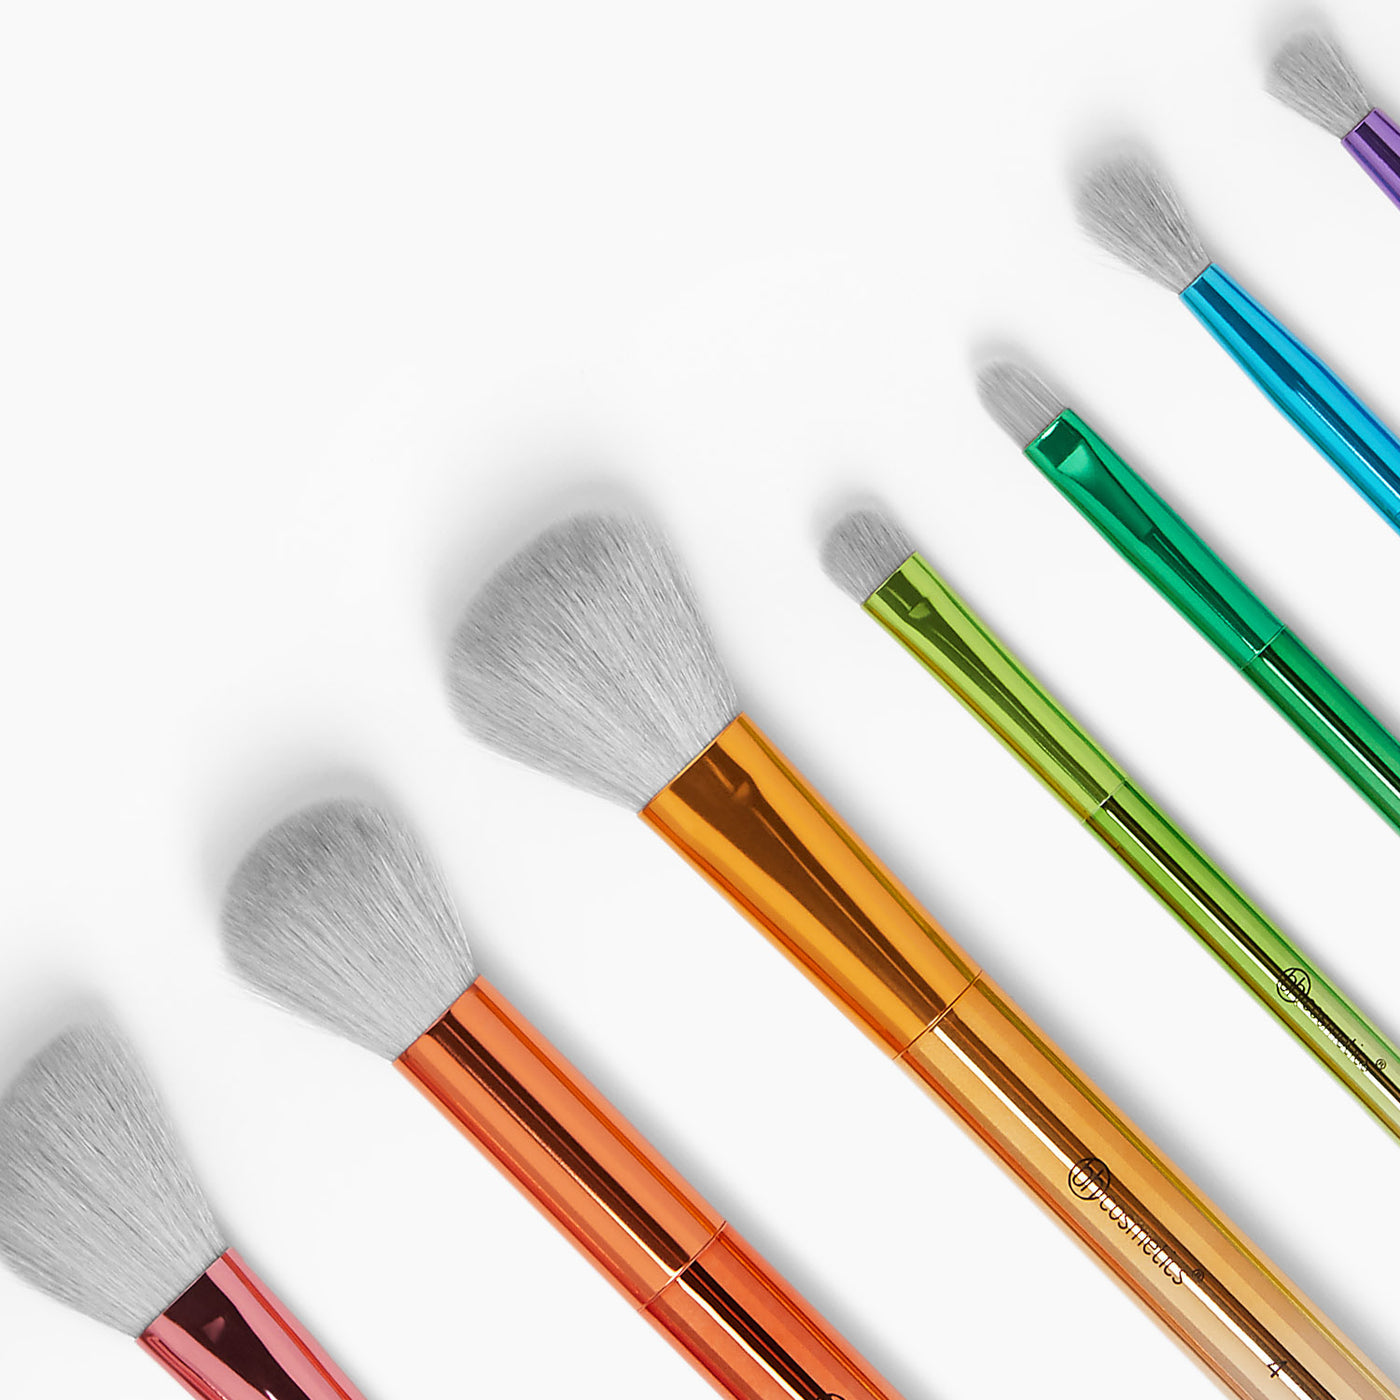 BH Cosmetics Take Me Back to Brazil Brushes